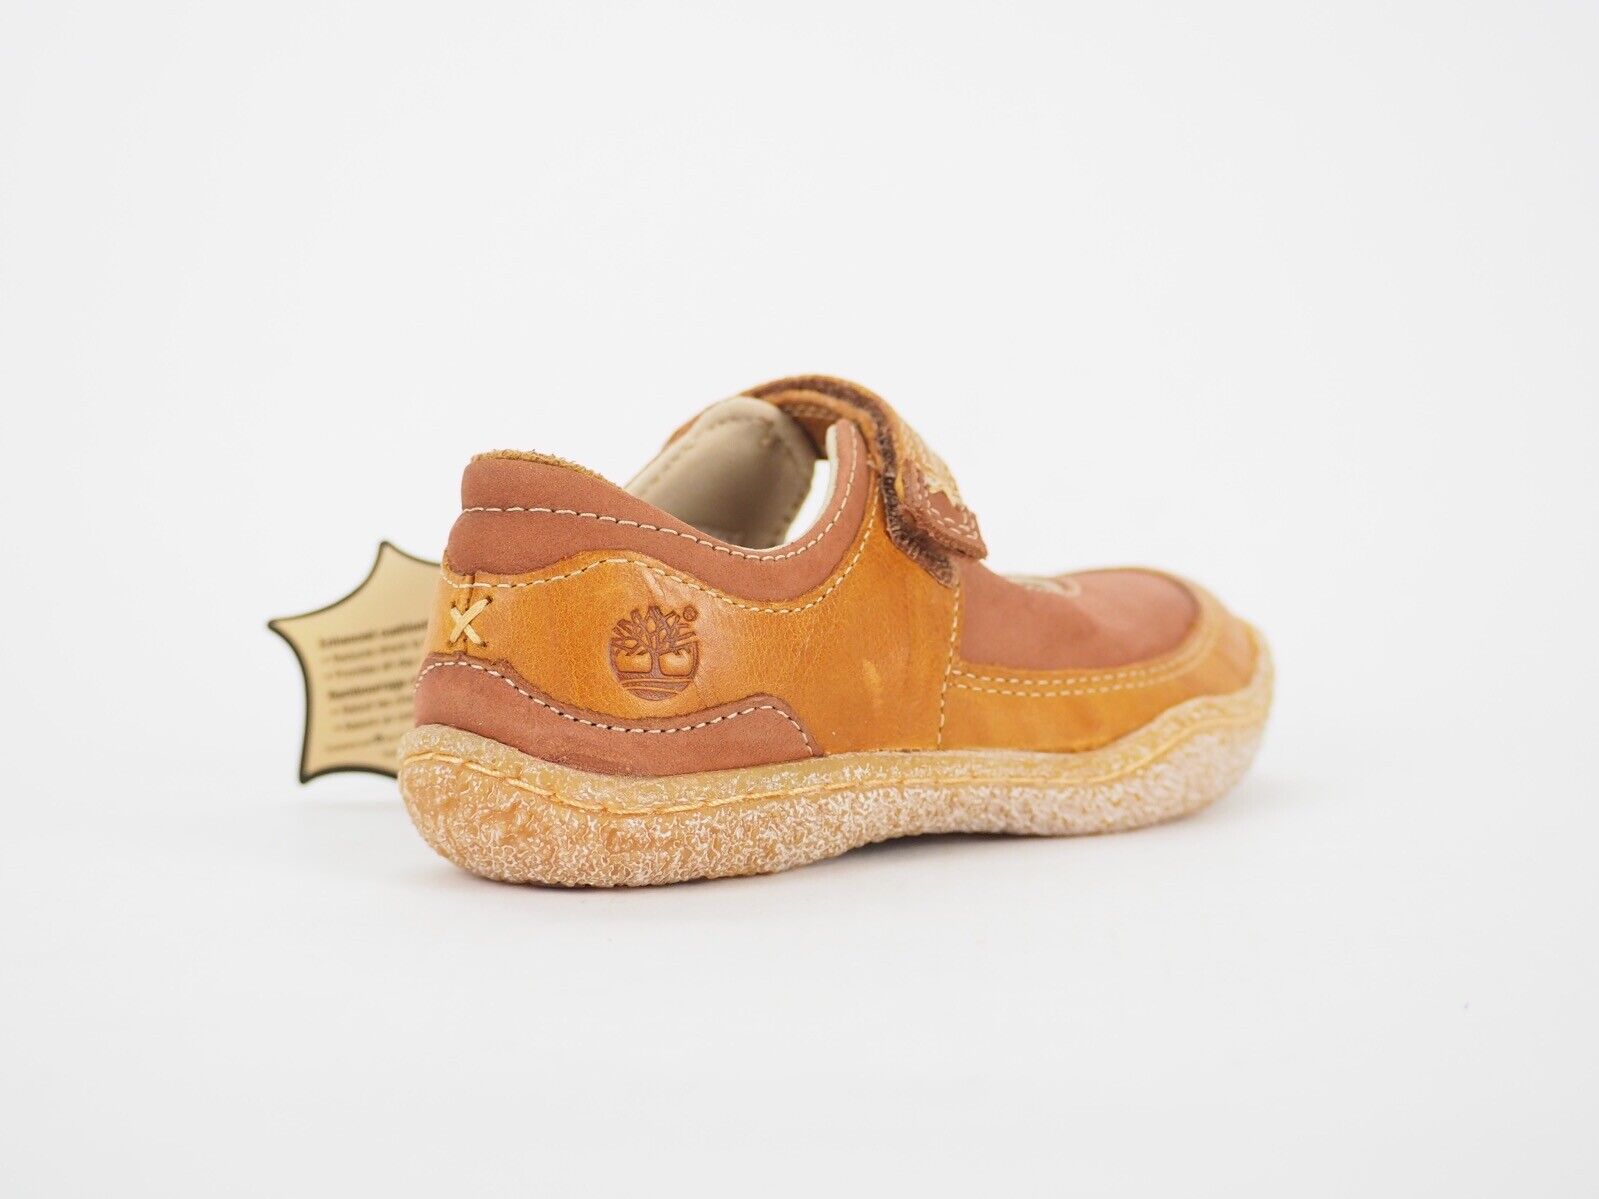 Girls Timberland Grafton Hill 51883 Light Brown Leather Casual Light Kids Shoes - London Top Style